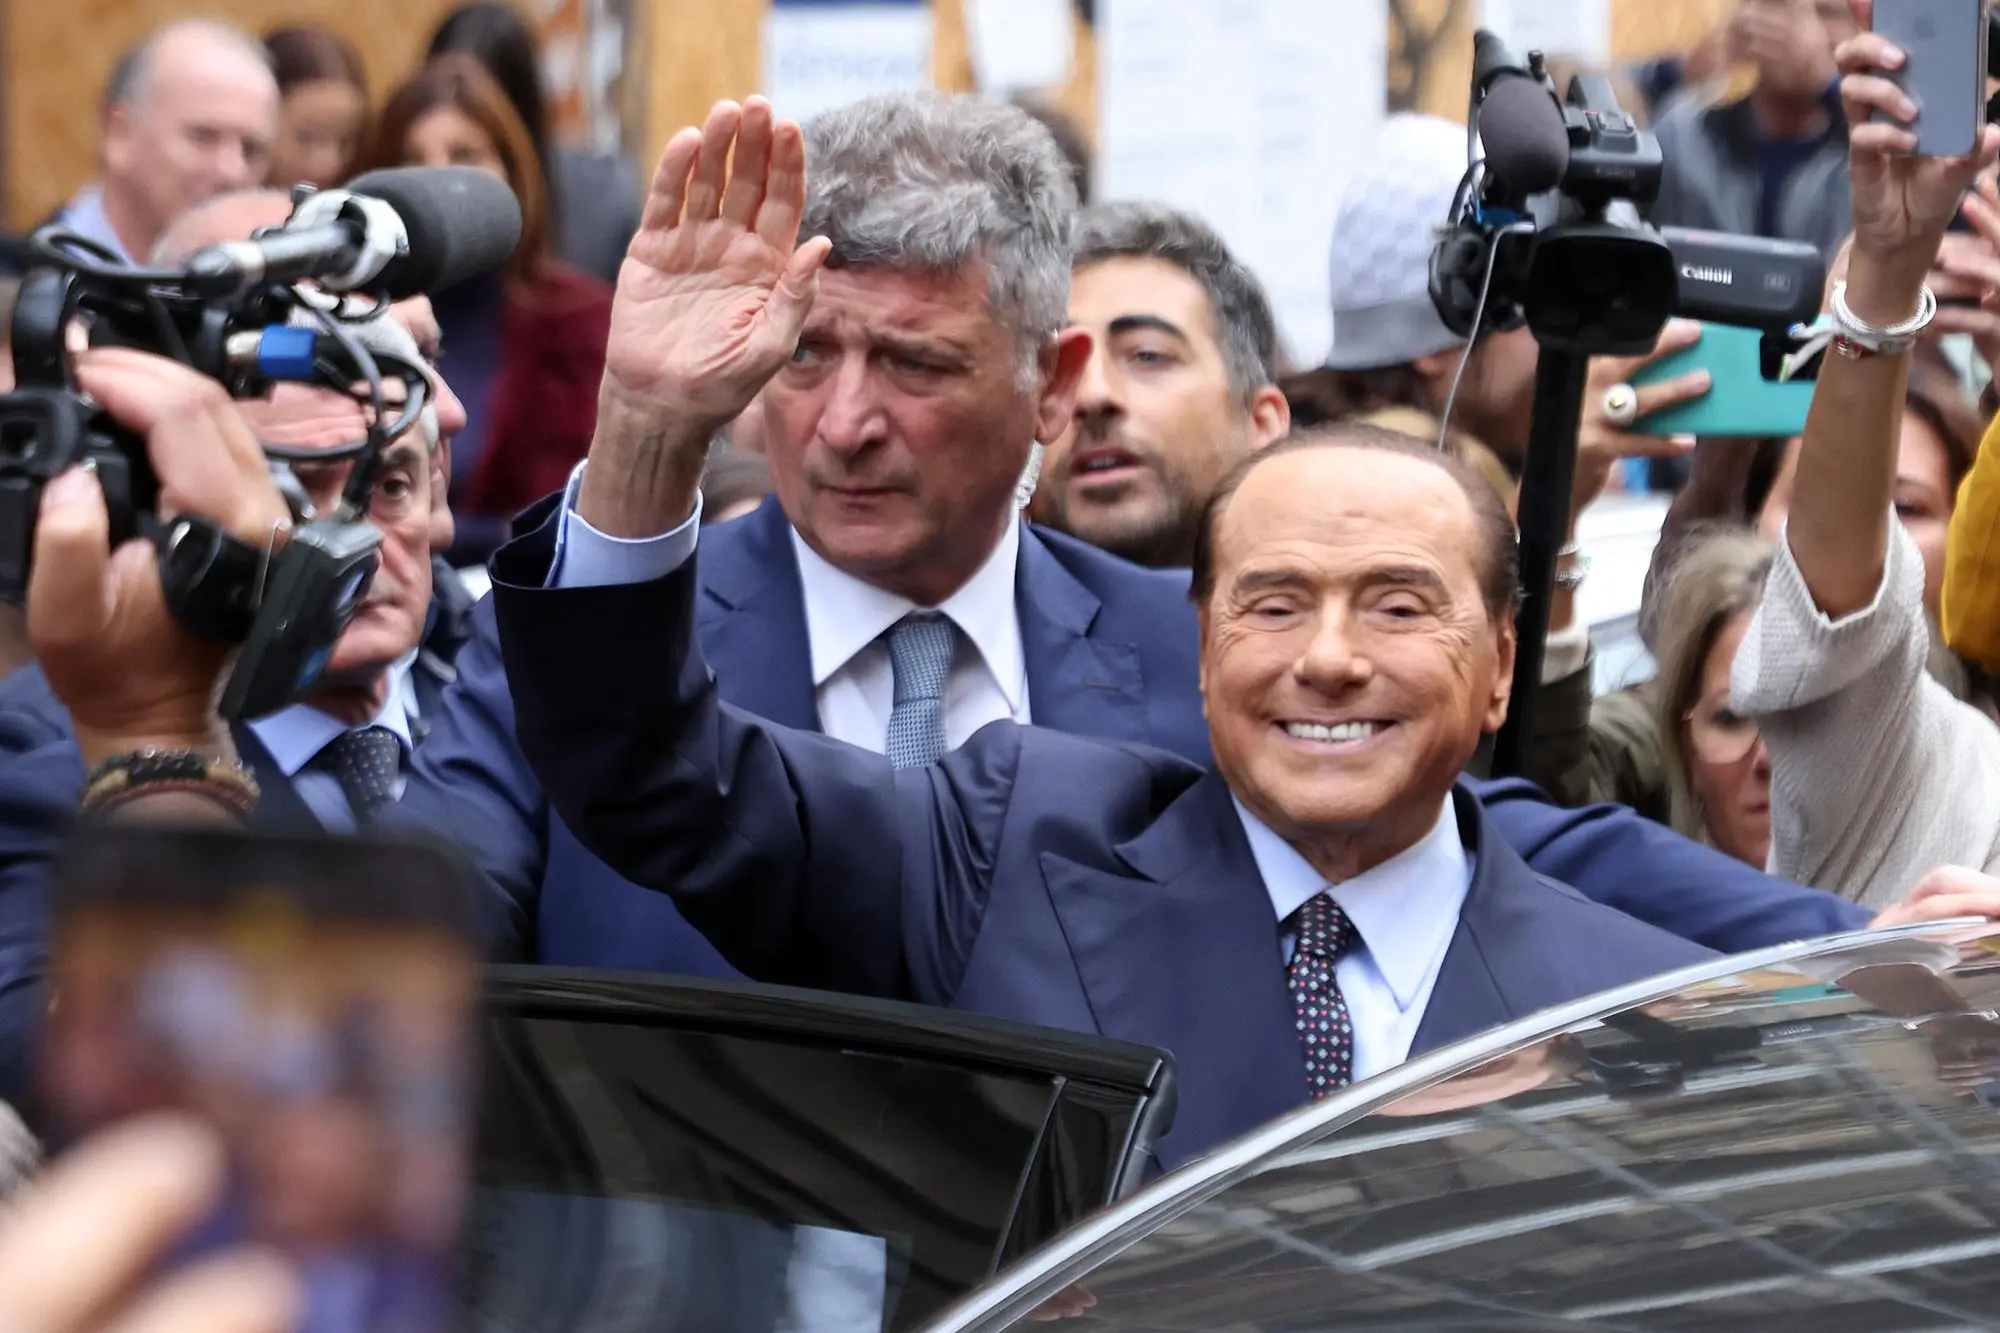 Former Italian Prime Minister and leader of Italian party Â?Forza ItaliaÂ? (FI), Silvio Berlusconi, during voting operations in the Italian general election at a polling station in Milan, Italy, 25 September 2022. ANSA/MATTEO BAZZI